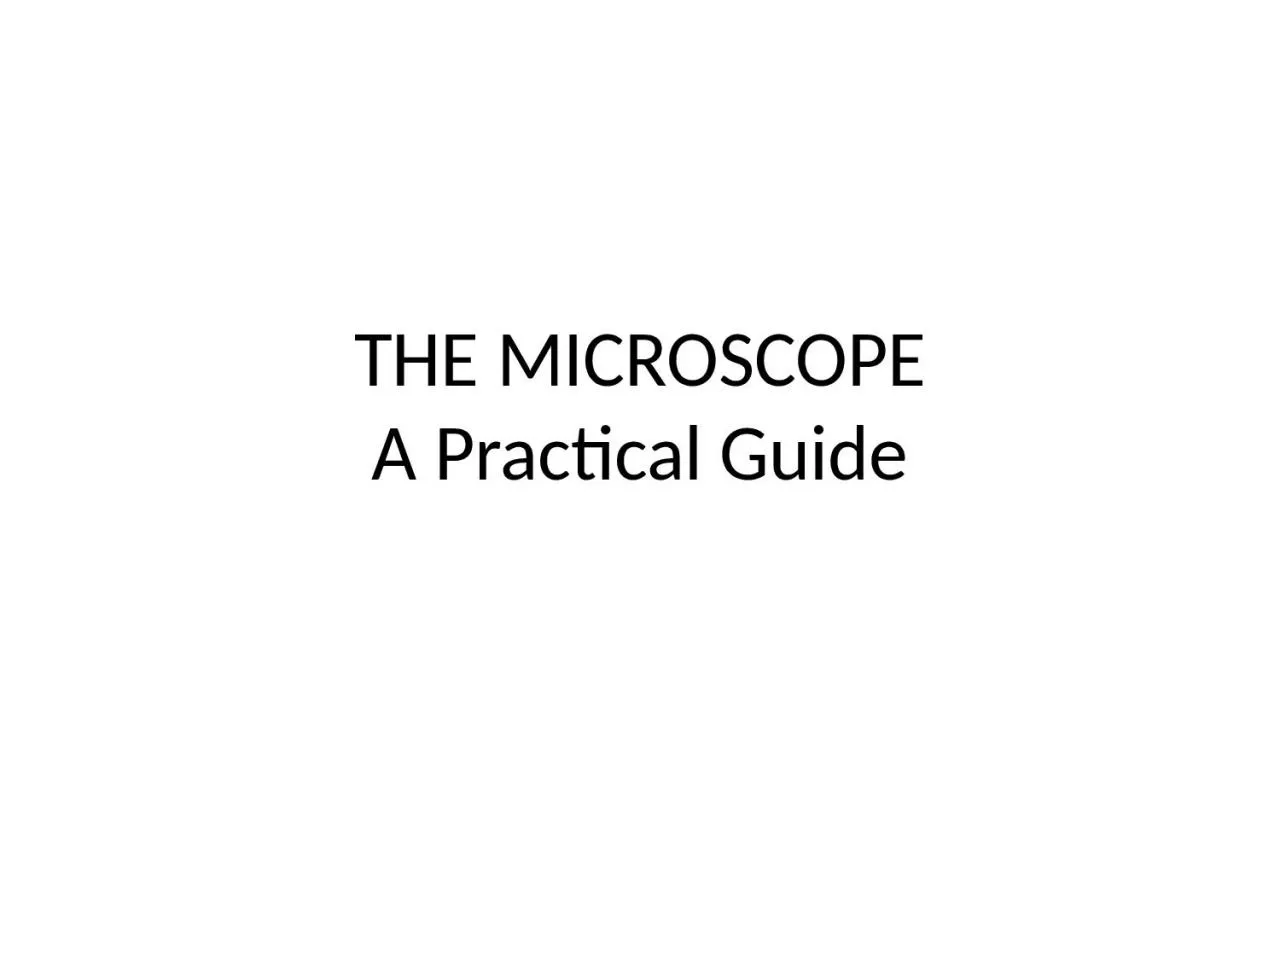 THE MICROSCOPE A Practical Guide